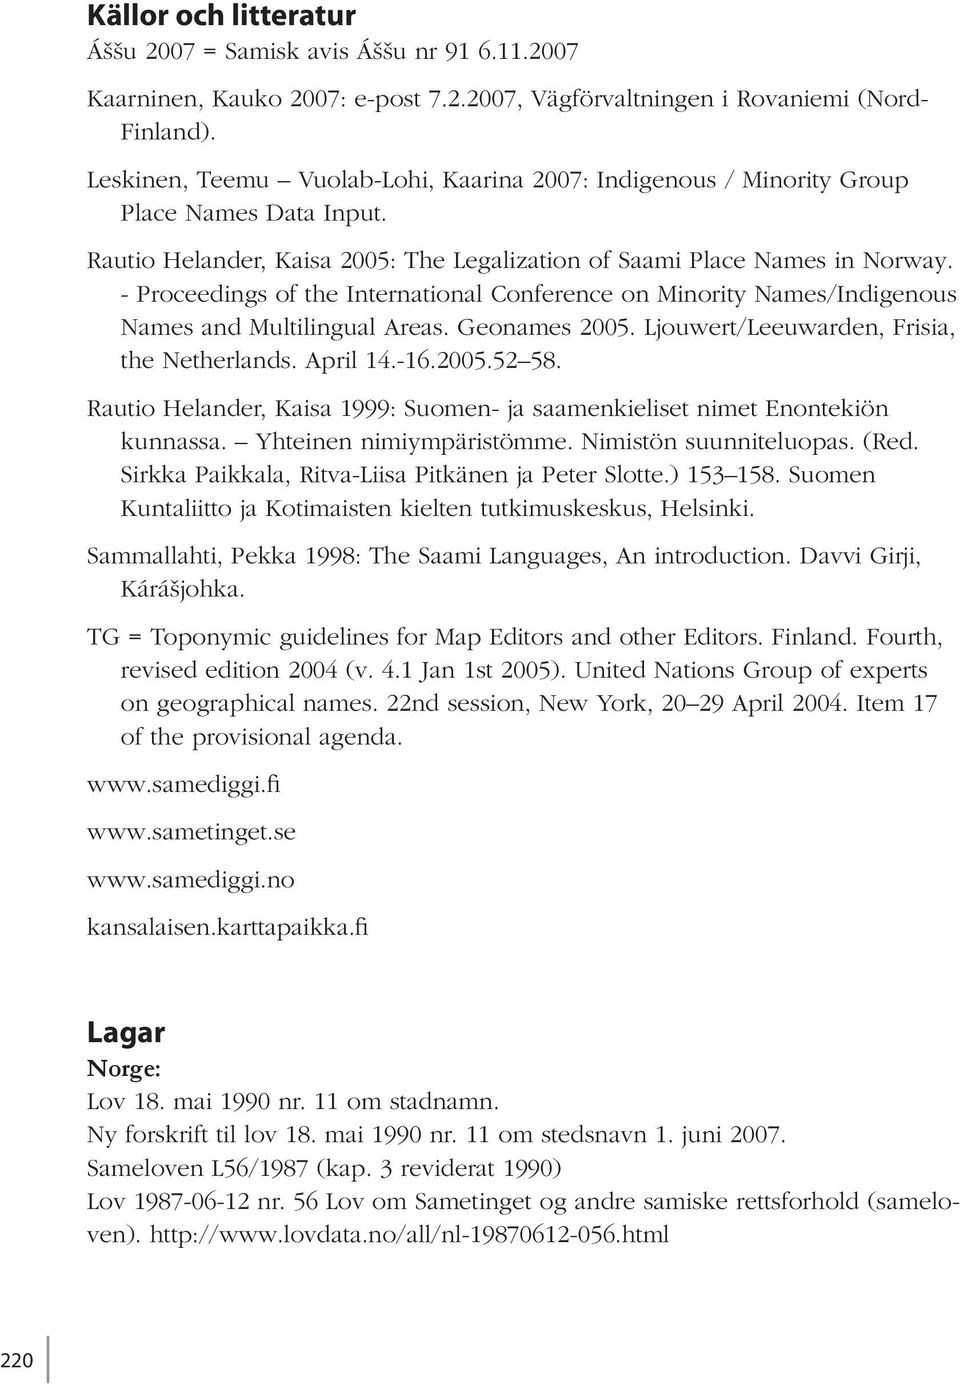 - Proceedings of the International Conference on Minority Names/Indigenous Names and Multilingual Areas. Geonames 2005. Ljouwert/Leeuwarden, Frisia, the Netherlands. April 14.-16.2005.52 58.